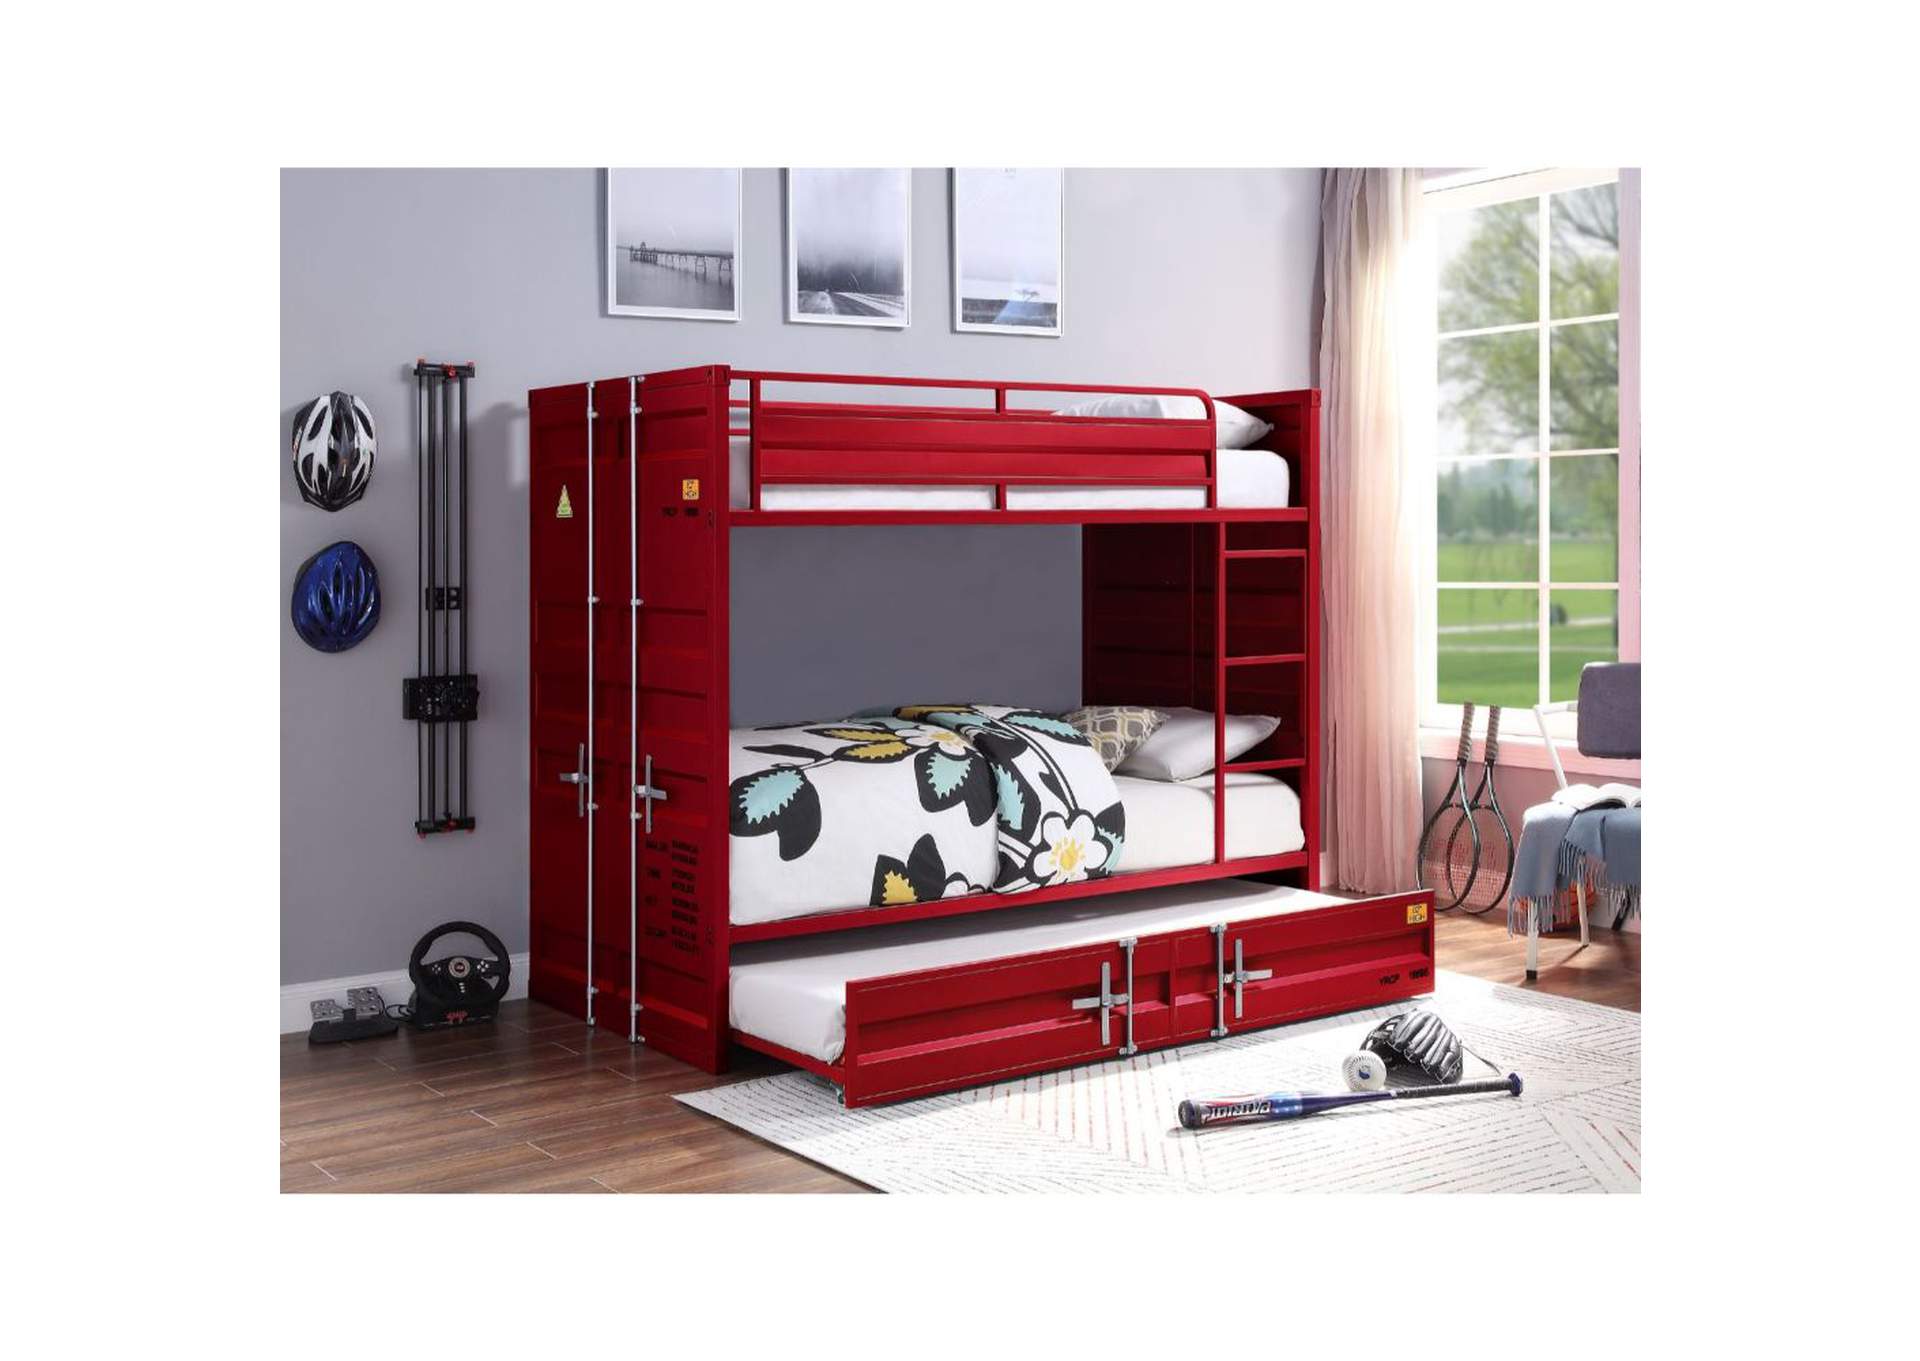 Cargo Red Twin Bunk Bed Harlem, Cargo Twin Bed